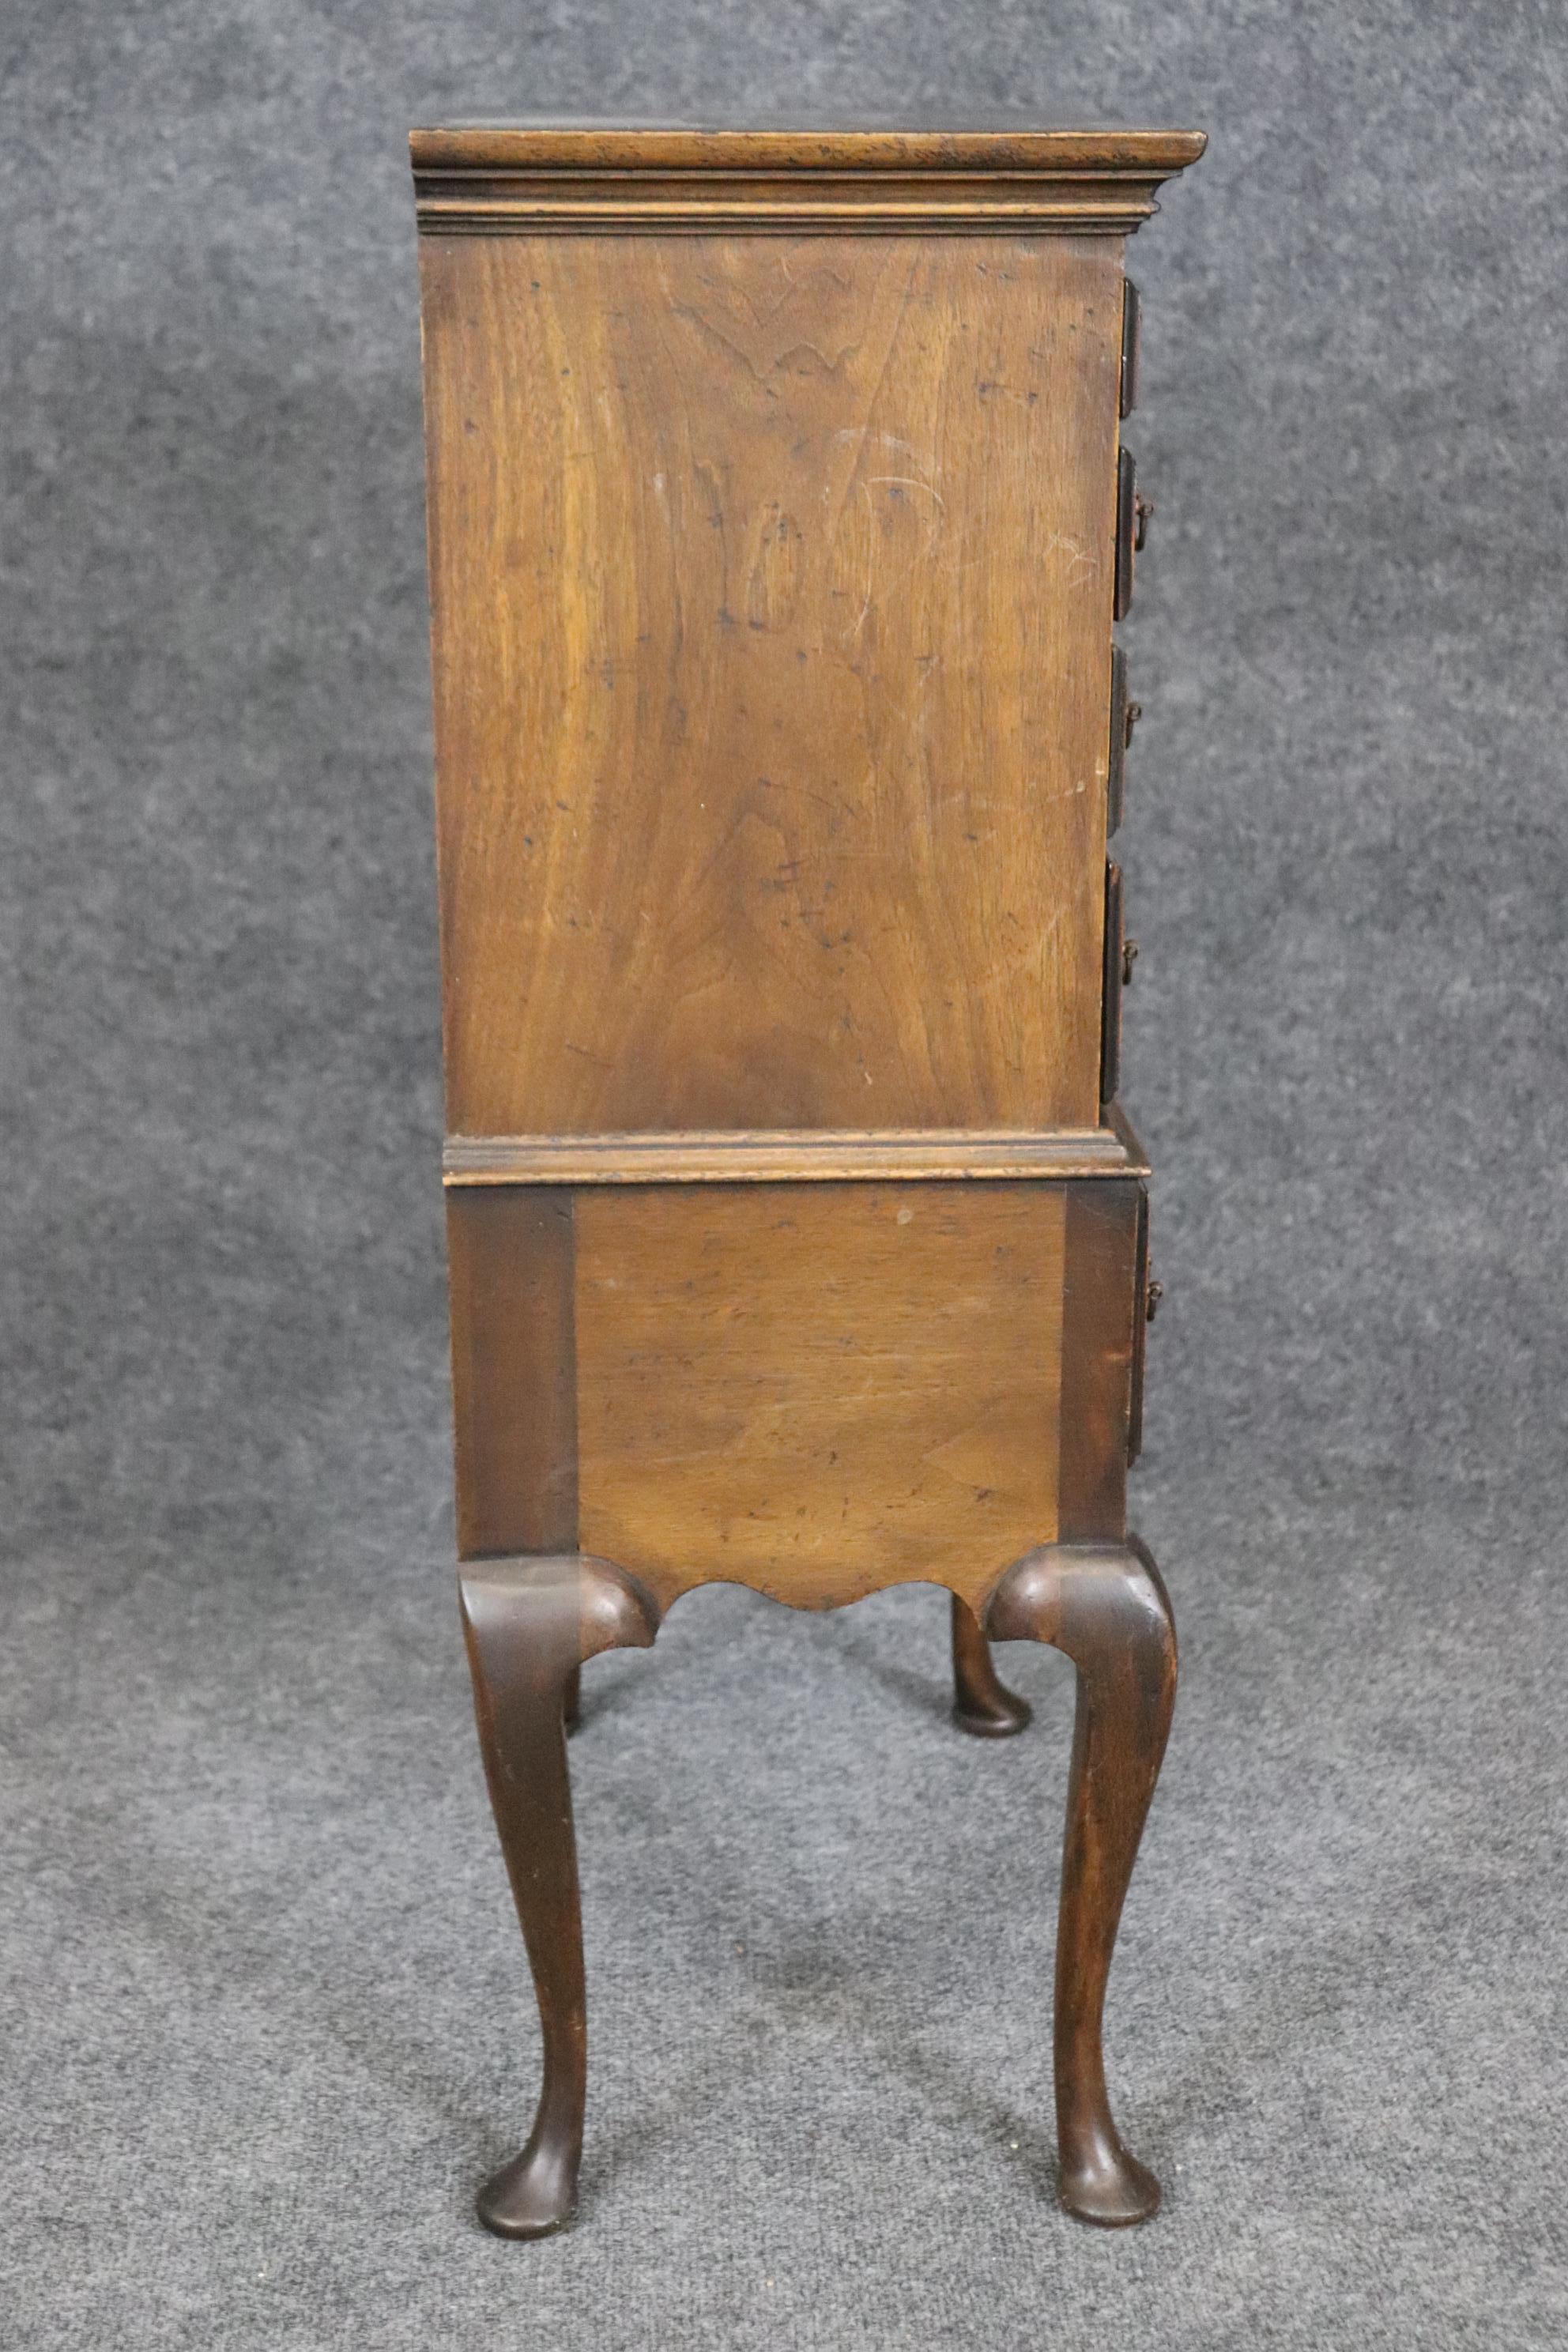 English Petite Under 3 Ft Tall Queen Anne Banded Walnut Lingerie Chect or Cabinet For Sale